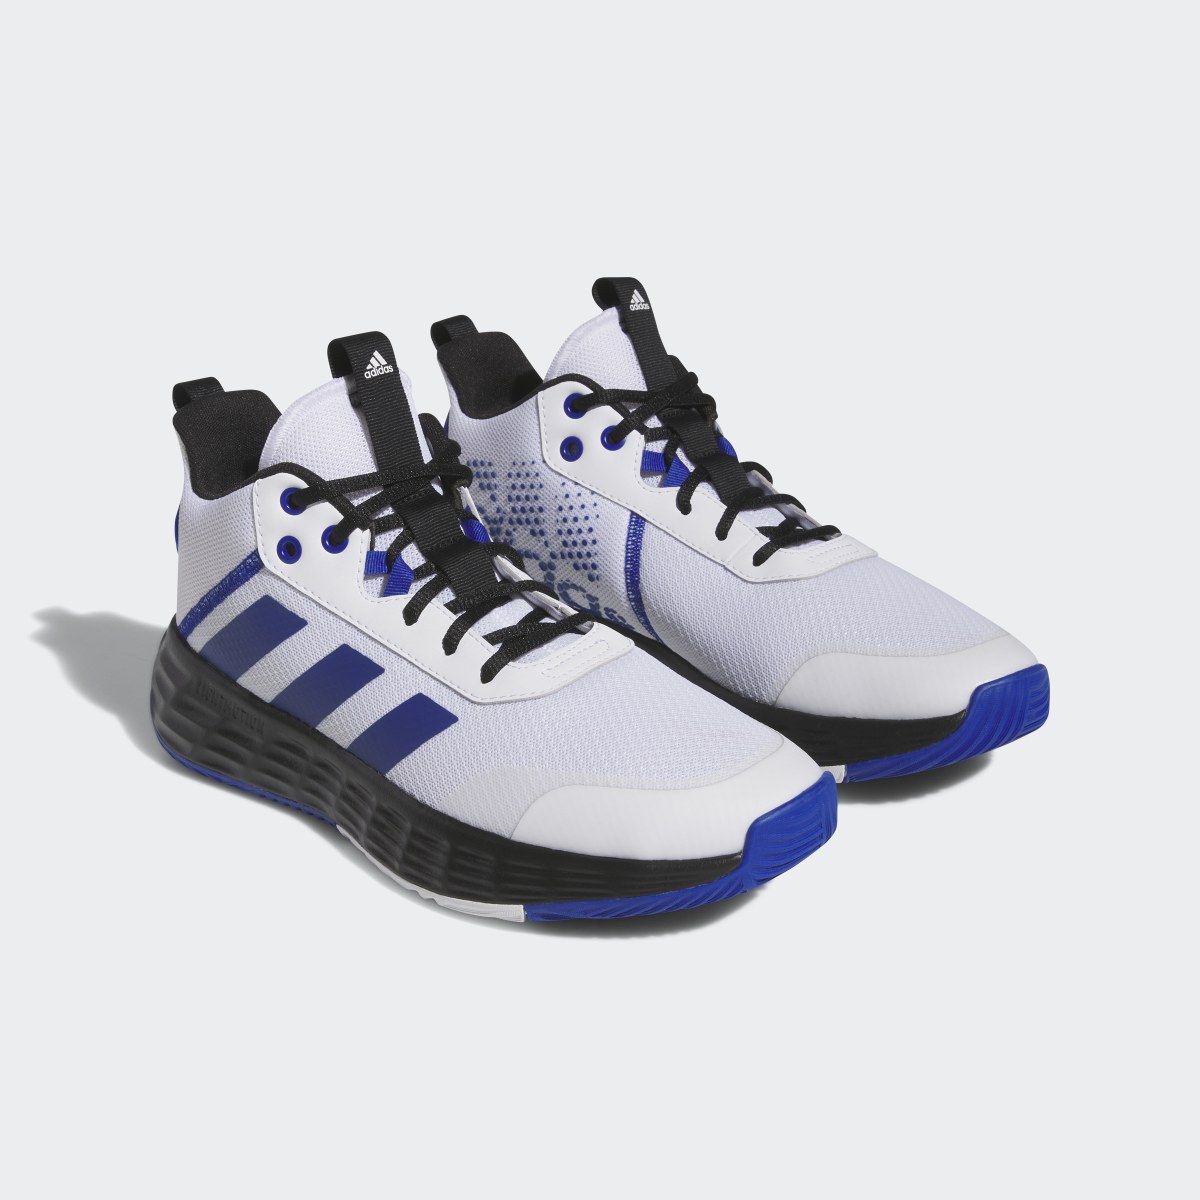 Adidas Ownthegame Shoes. 5